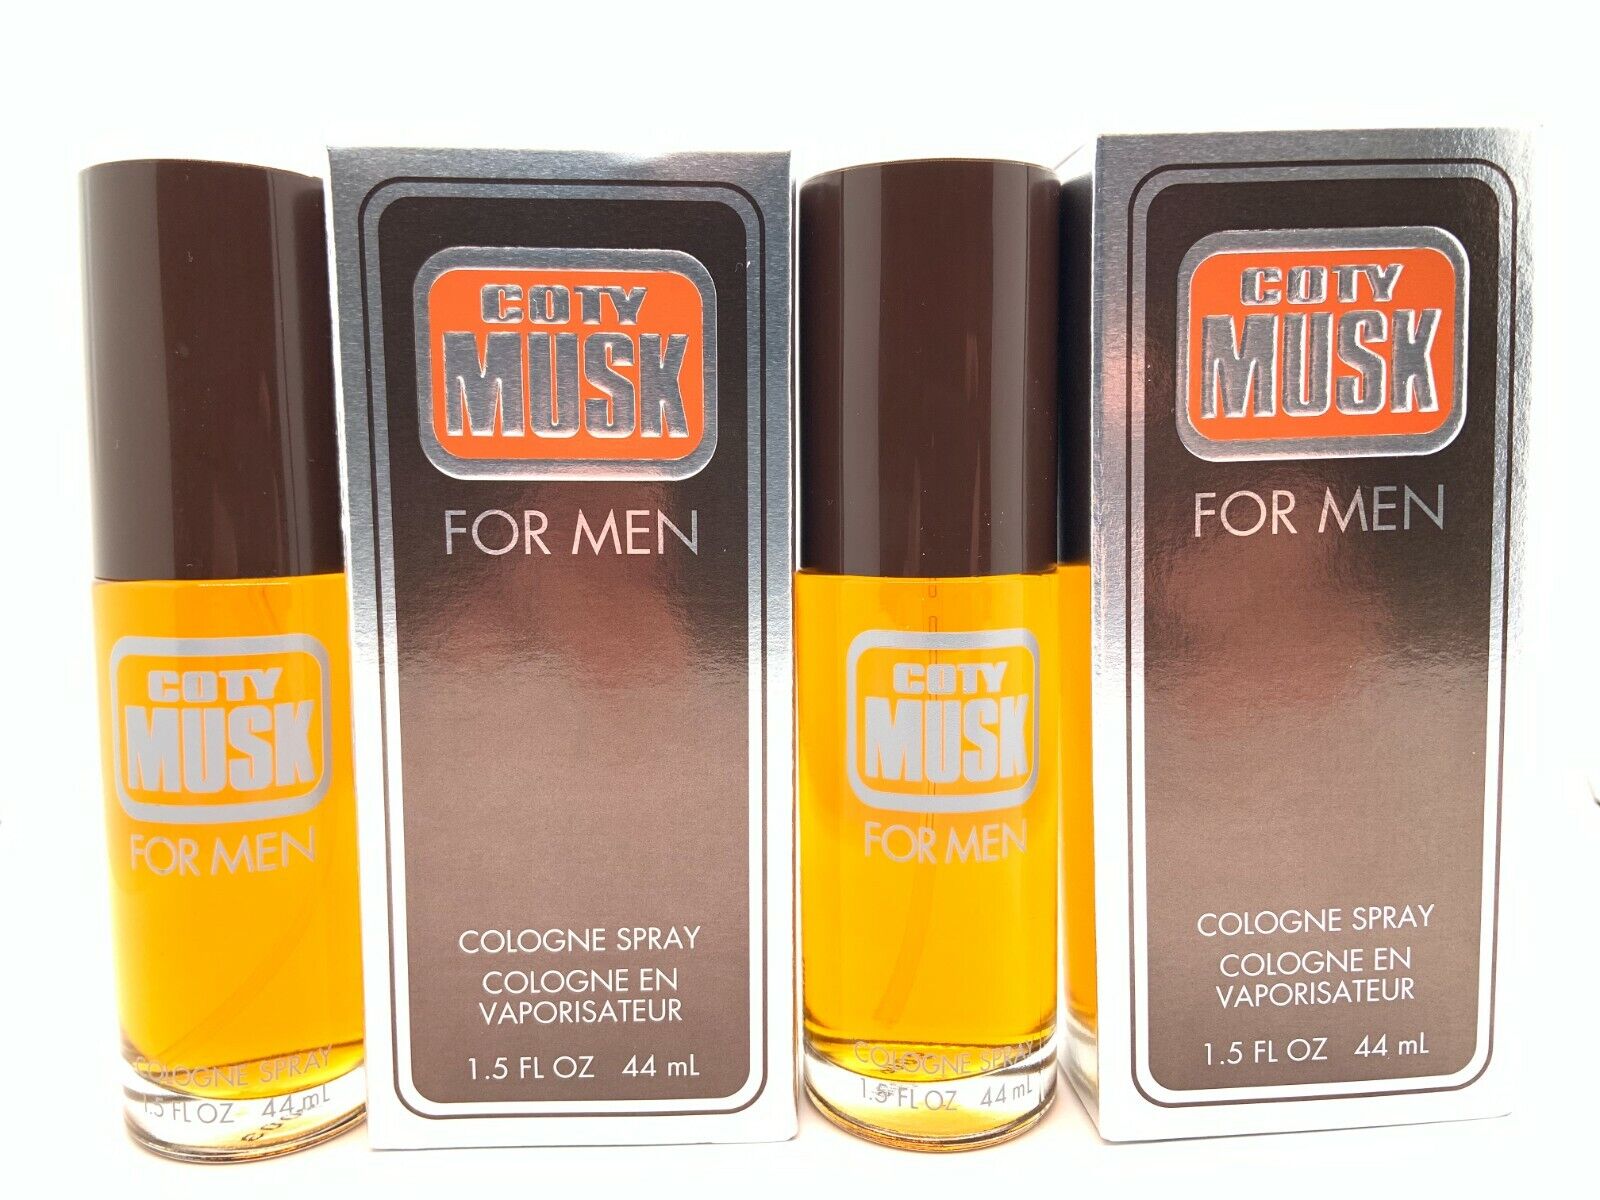 Lot of 2 Pc - Coty Musk 1.5 oz Cologne Spray, for Men Pack of 2 Pc - New in Box